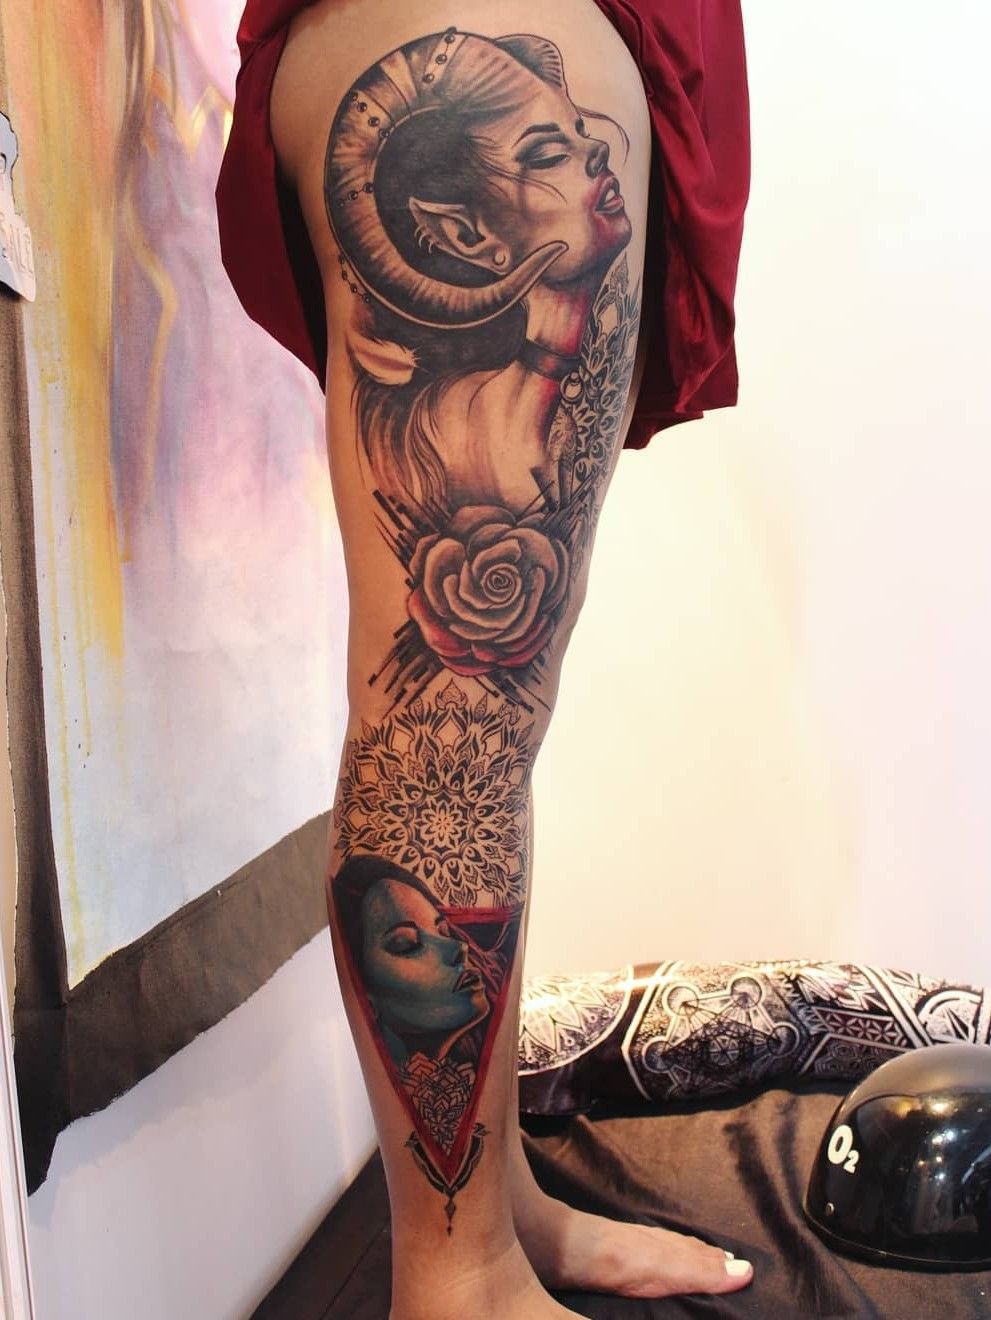 Head to these tattoo studios in Bengaluru and get inked!